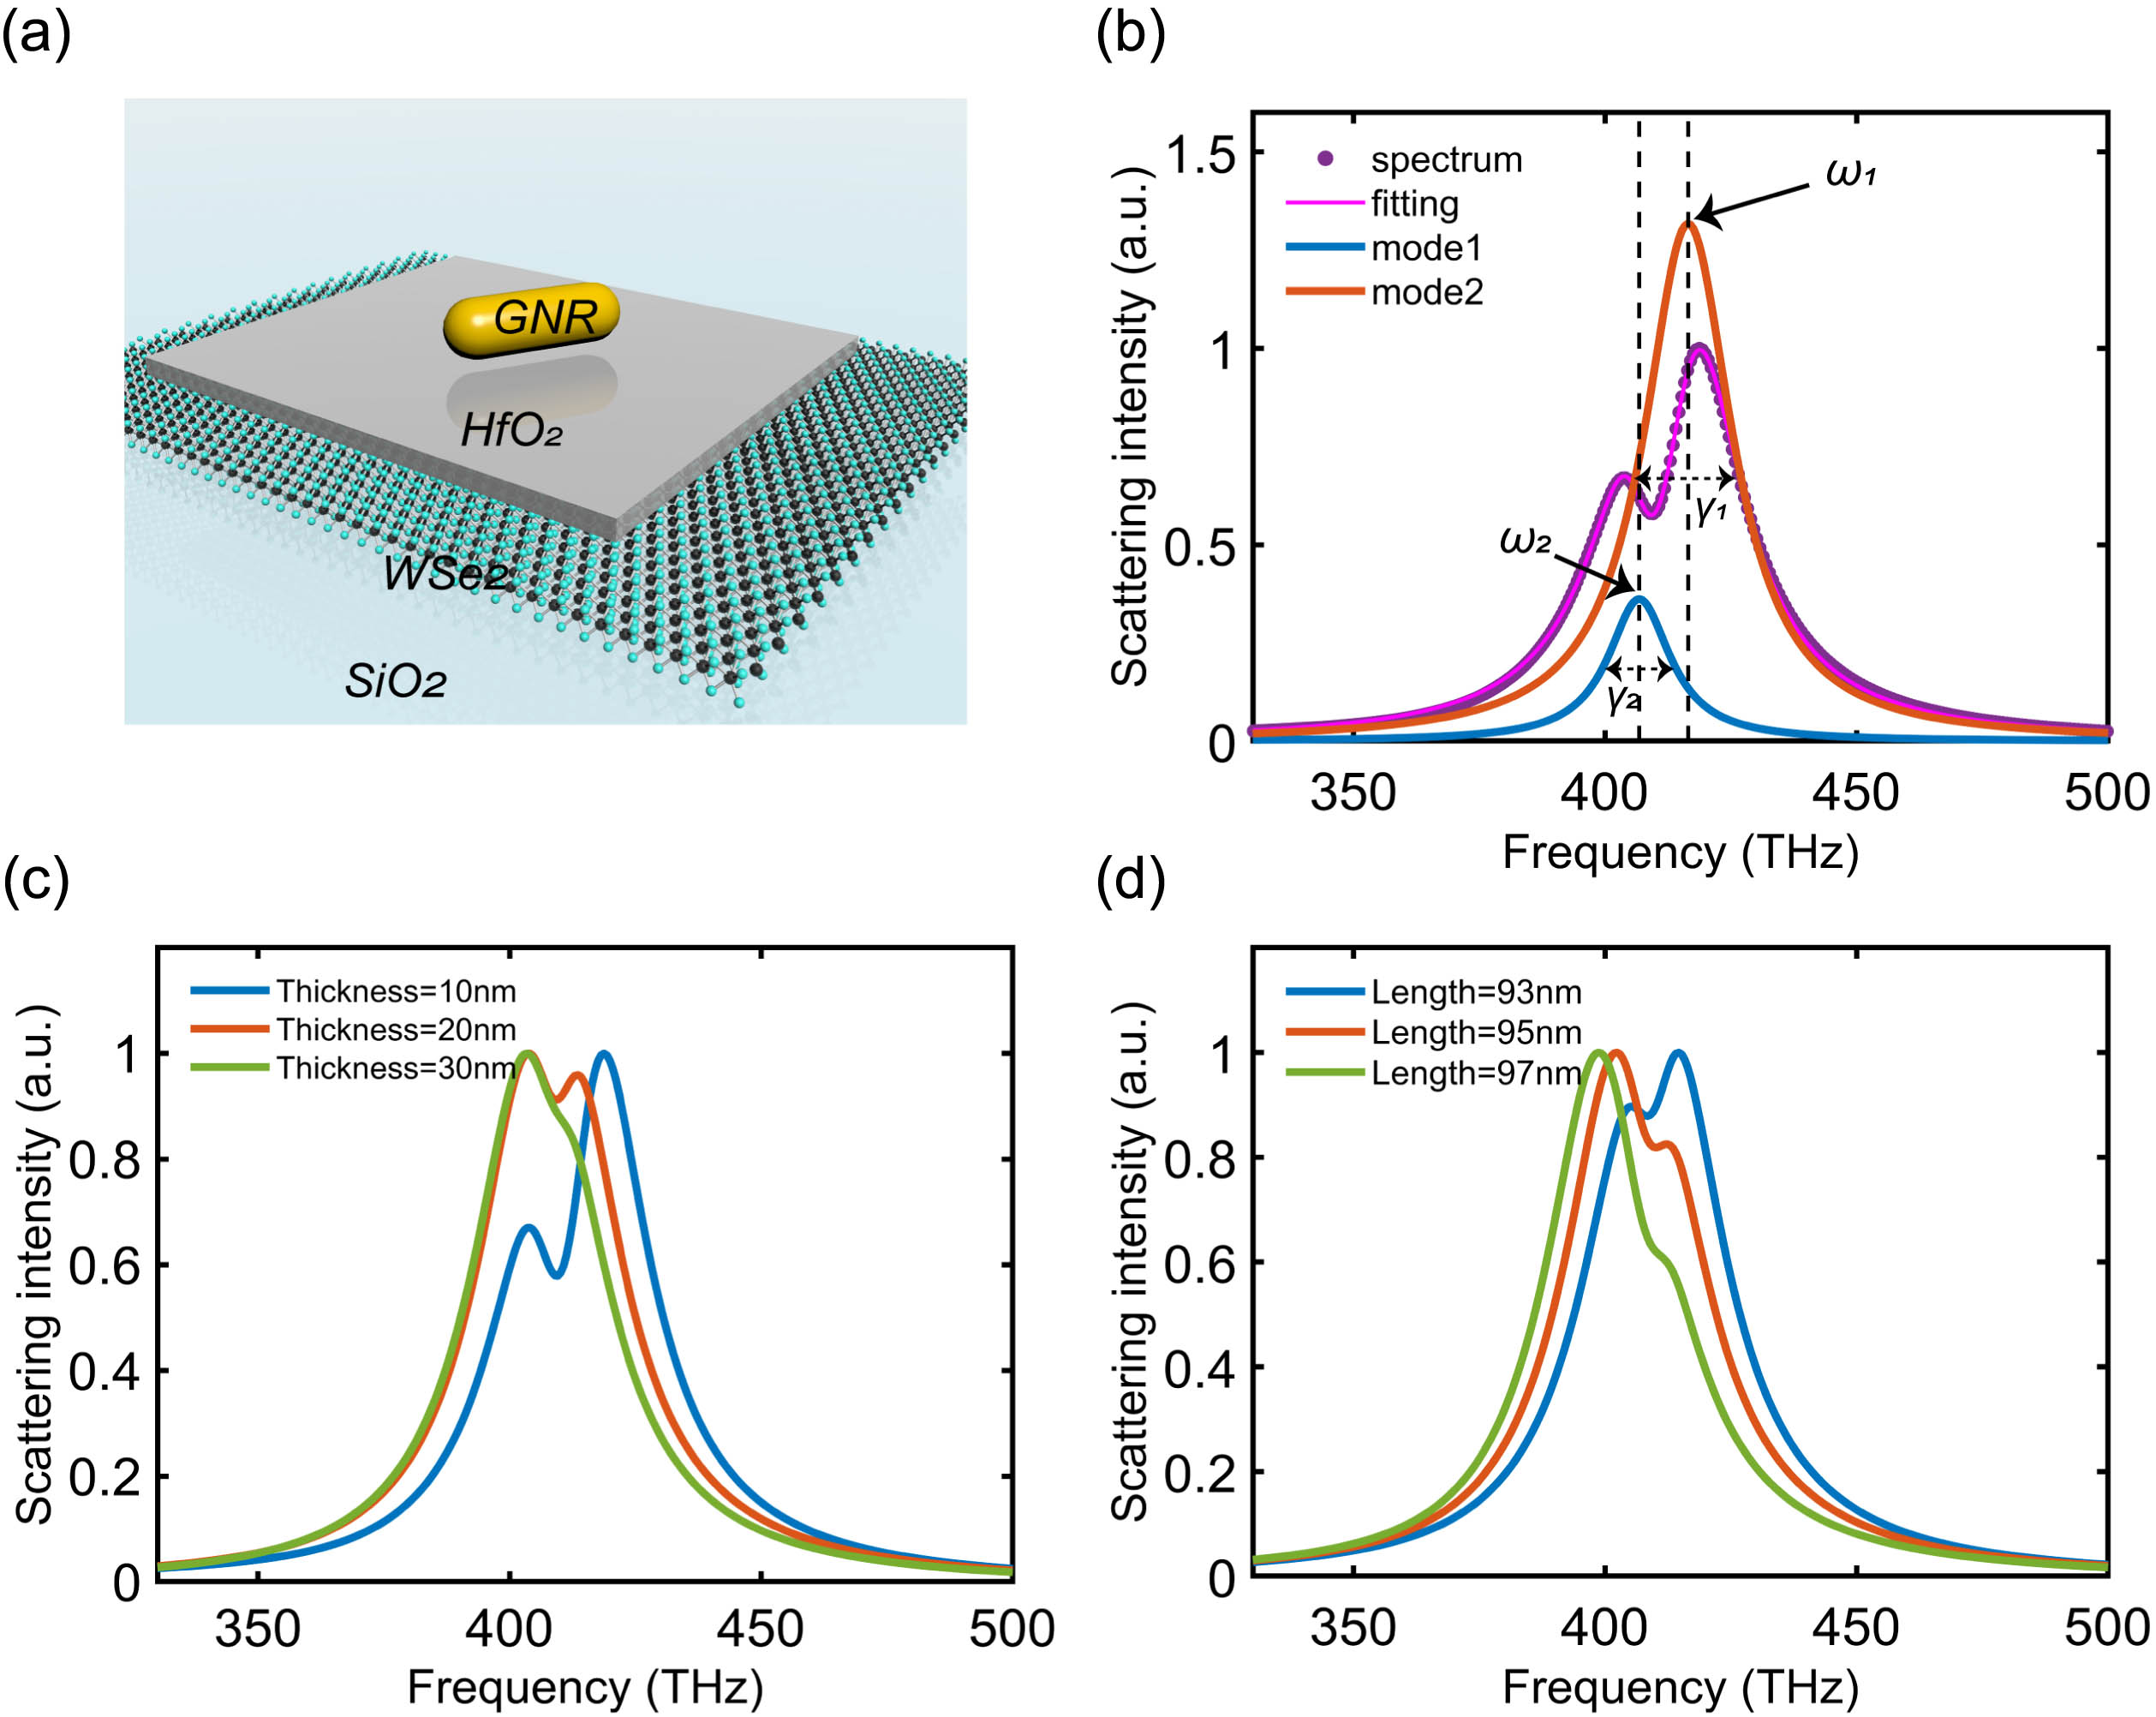 Plasmon-exciton system with adjustable scattering spectrum. (a) Schematic of the plasmon-exciton system composed of a GNR and a monolayer WSe2 separated by an auxiliary layer of HfO2. (b) Scattering spectrum of the plasmon-exciton system. The purple points correspond to the scattering spectrum from numerical simulation, with a HfO2 thickness of 10 nm and a GNR length of 94 nm. The red curve is the double-Lorentzian fitting result of the scattering spectrum. Blue and green curves are the individual hybrid modes extracted from the fitting result. (c) Scattering spectra for various thicknesses (10 nm, 20 nm, and 30 nm) of HfO2 with GNR length of 94 nm. (d) Scattering spectra for various lengths (93 nm, 95 nm, and 97 nm) of GNR with HfO2 thickness of 20 nm.